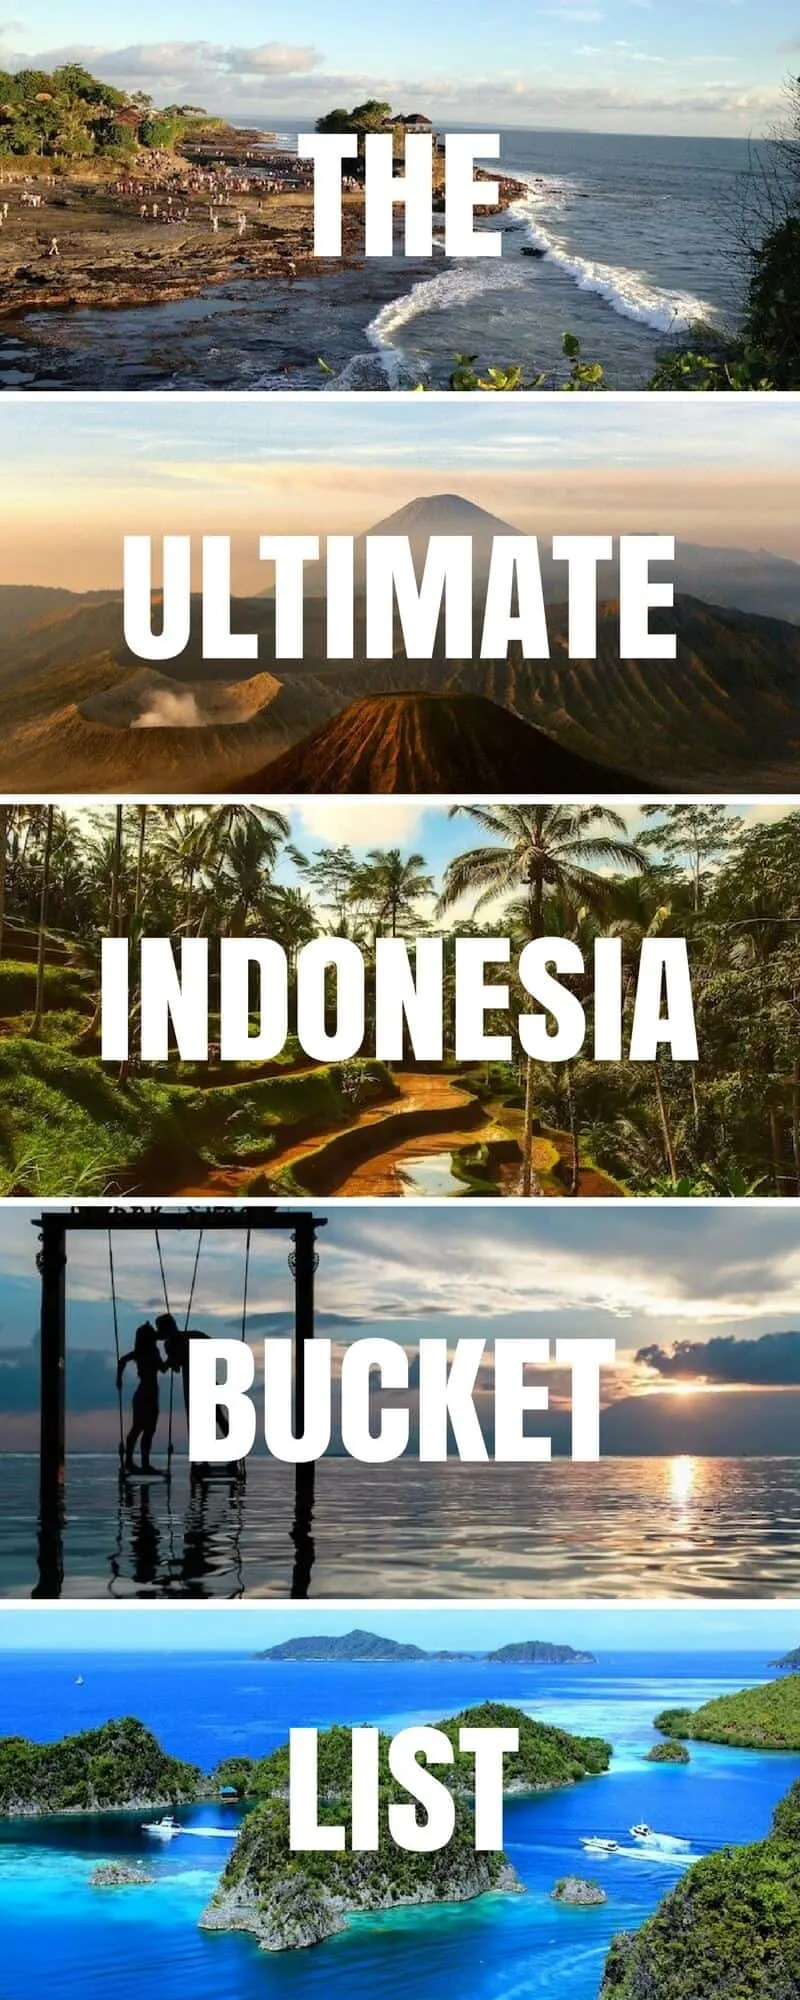 Tourists Attractions in Indonesia